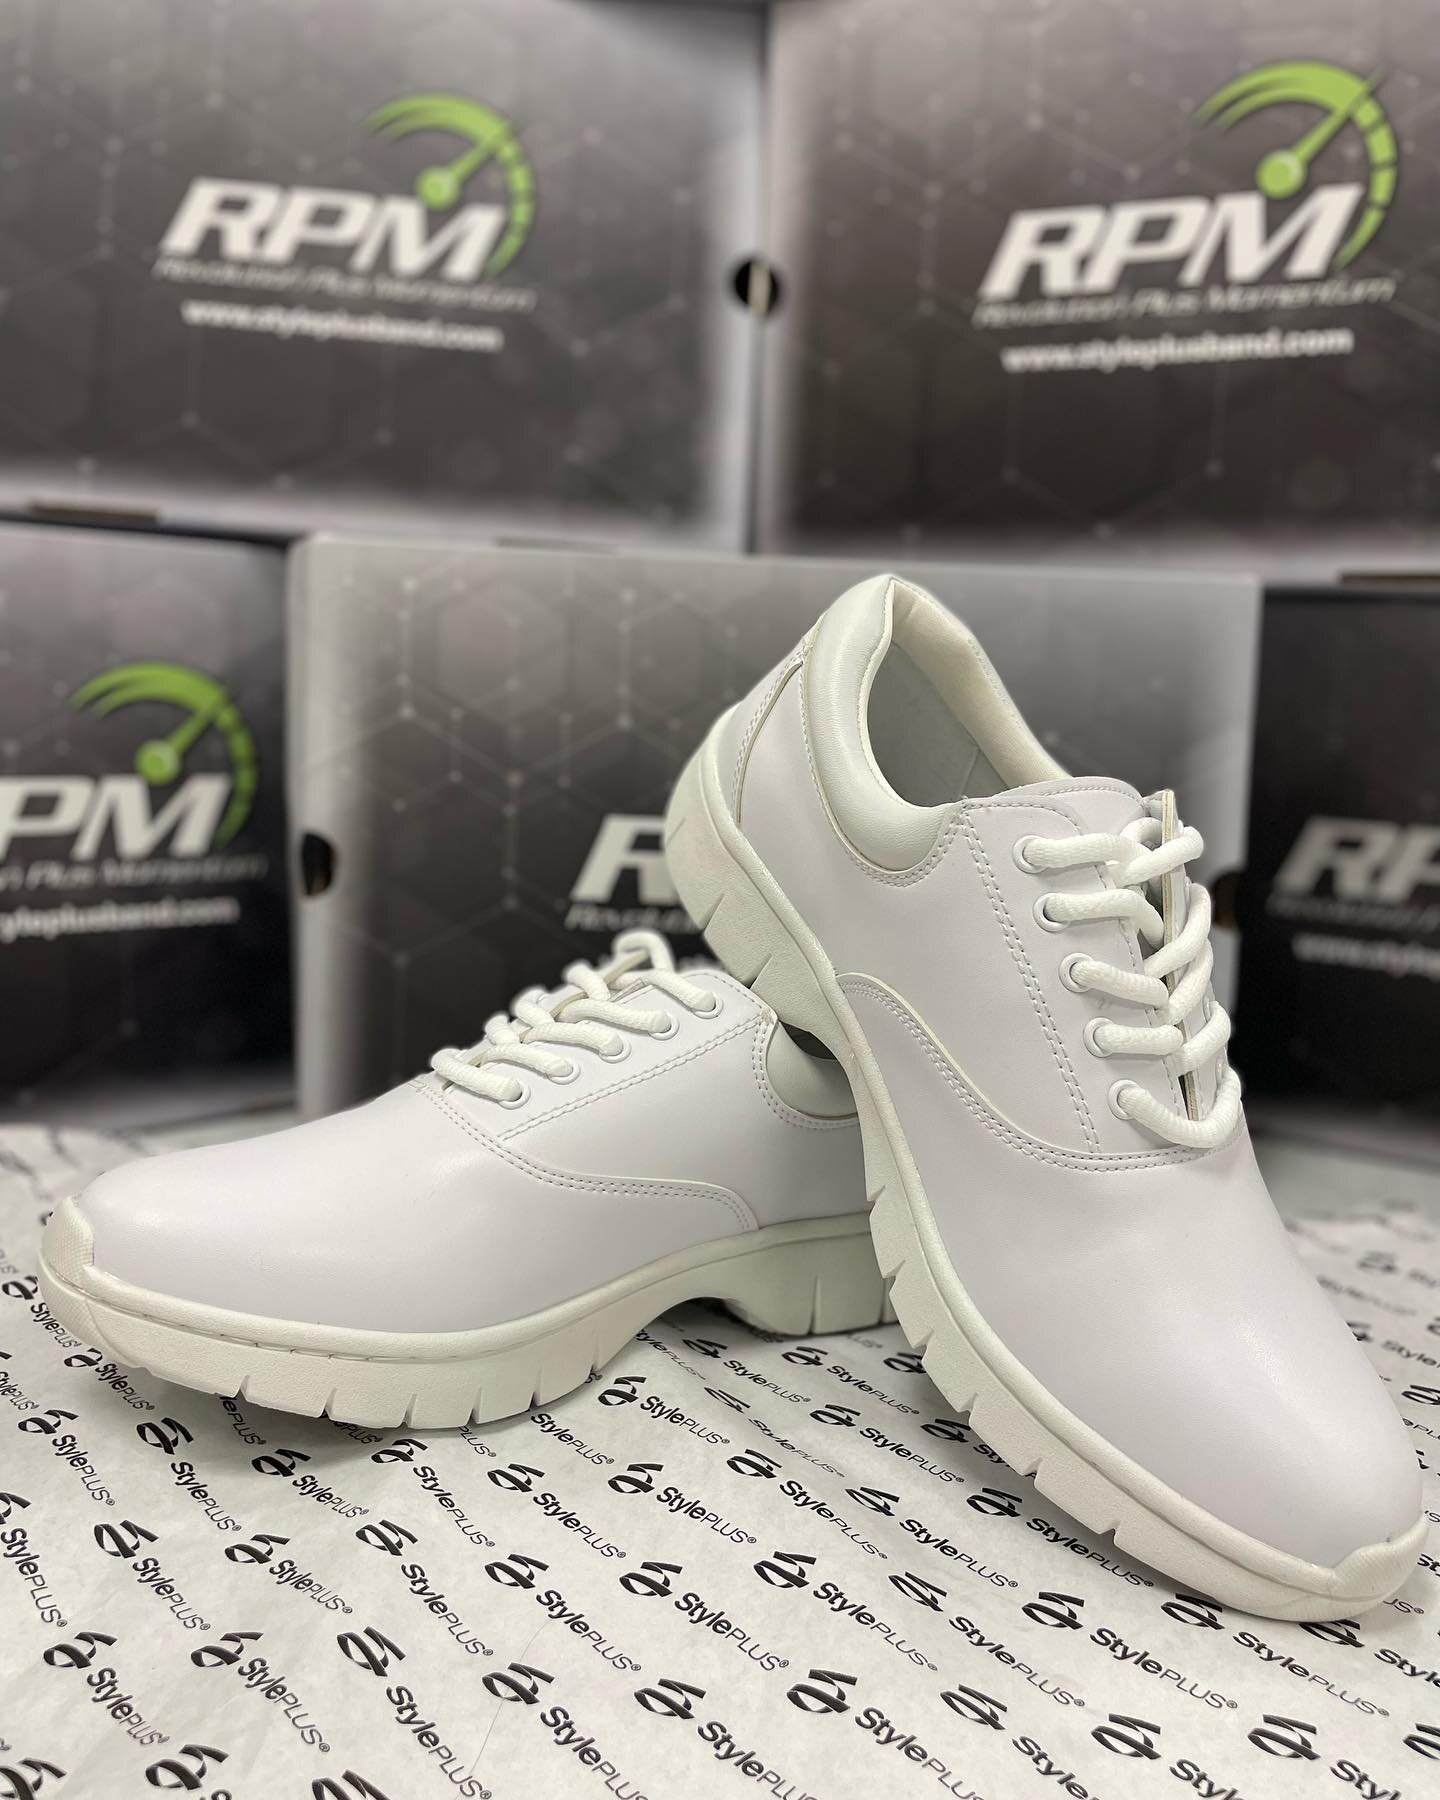 Fresh kicks just came in from @styleplus_band ! 🙌

#EWI2024 #etherealwinds #styleplus #partner #marchingband #wgi #dci